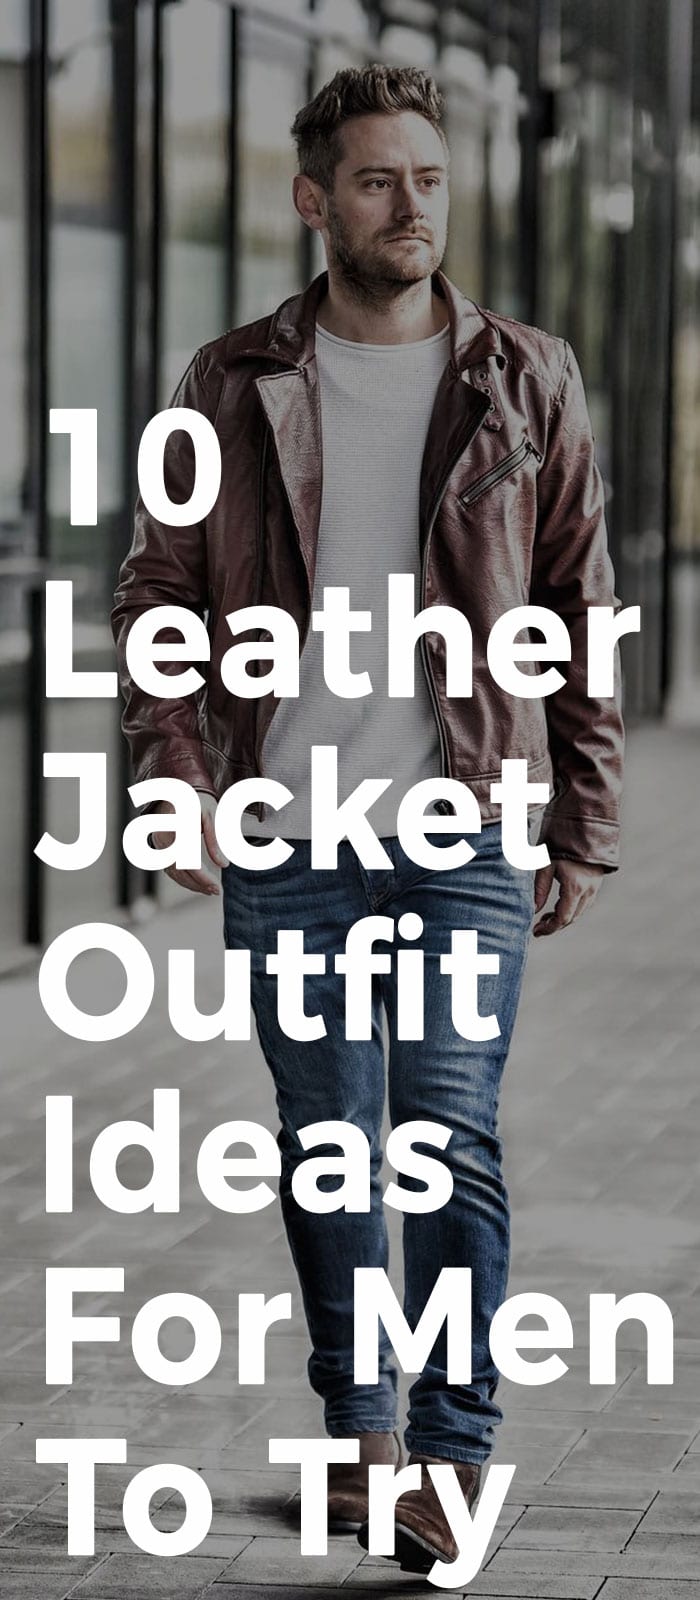 10 Leather Jacket Outfit Ideas For Men To Try